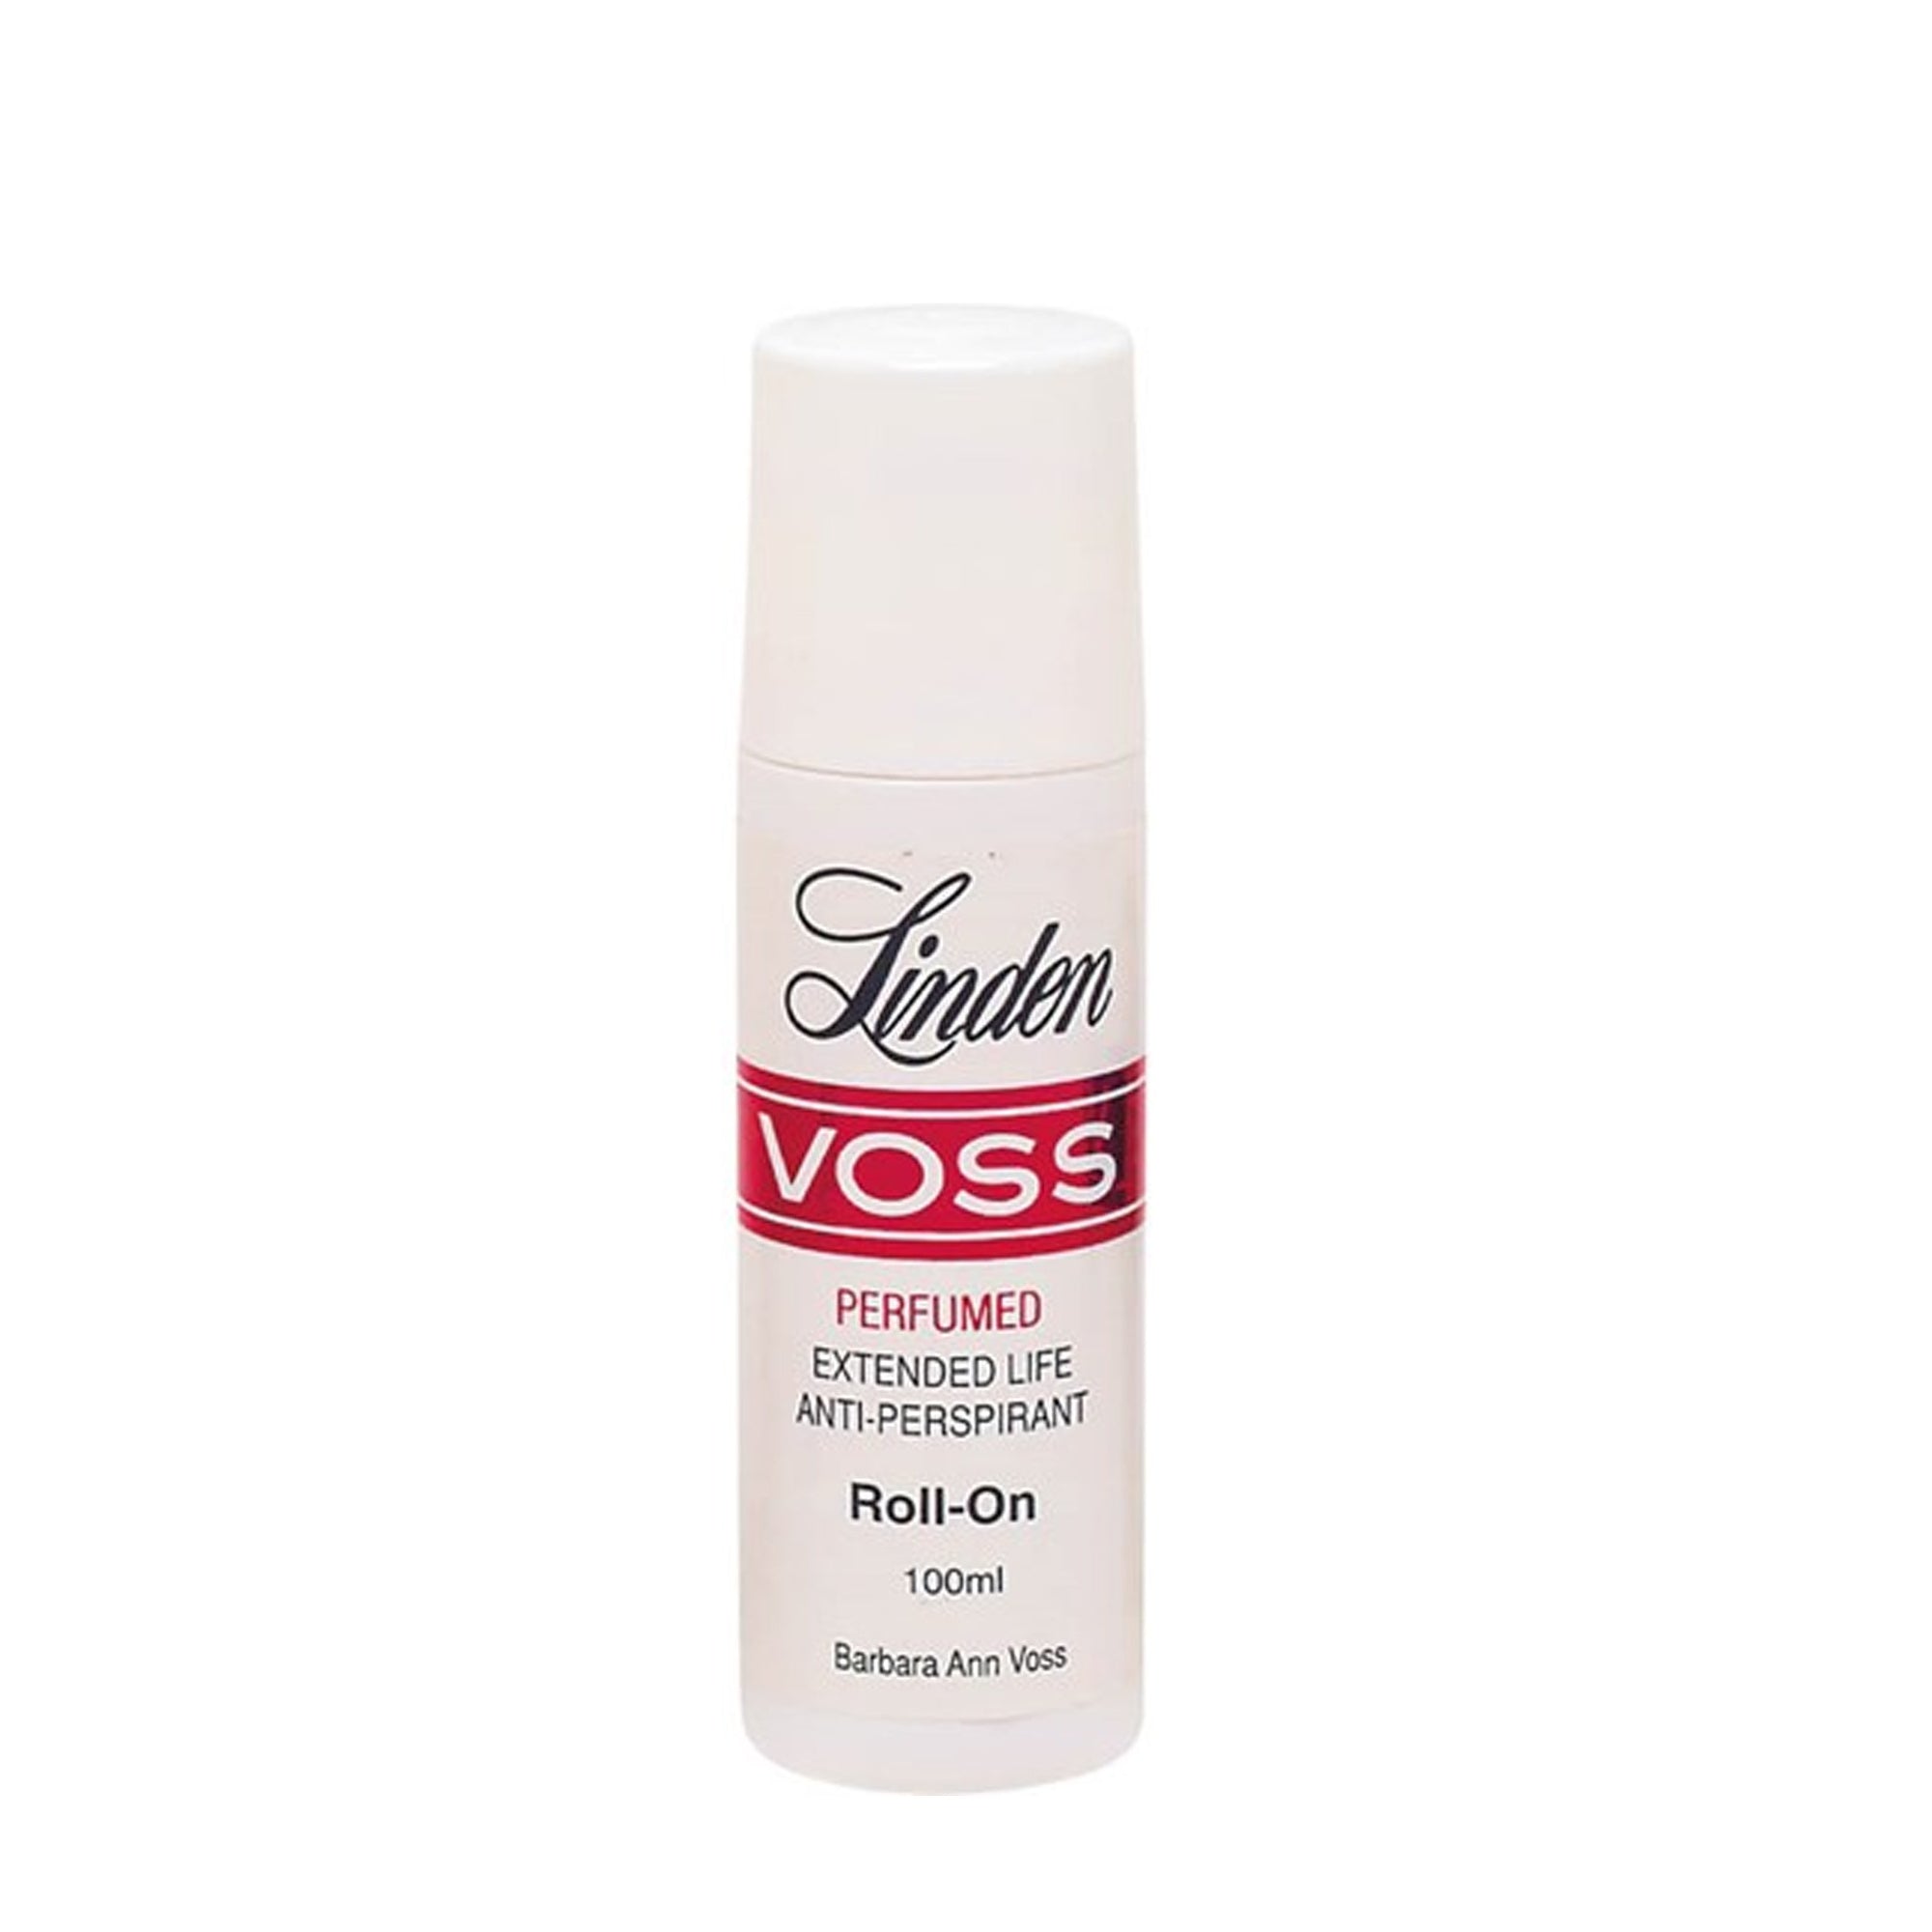 Linden VOSS Perfumed Anti-Perspirant Roll-On